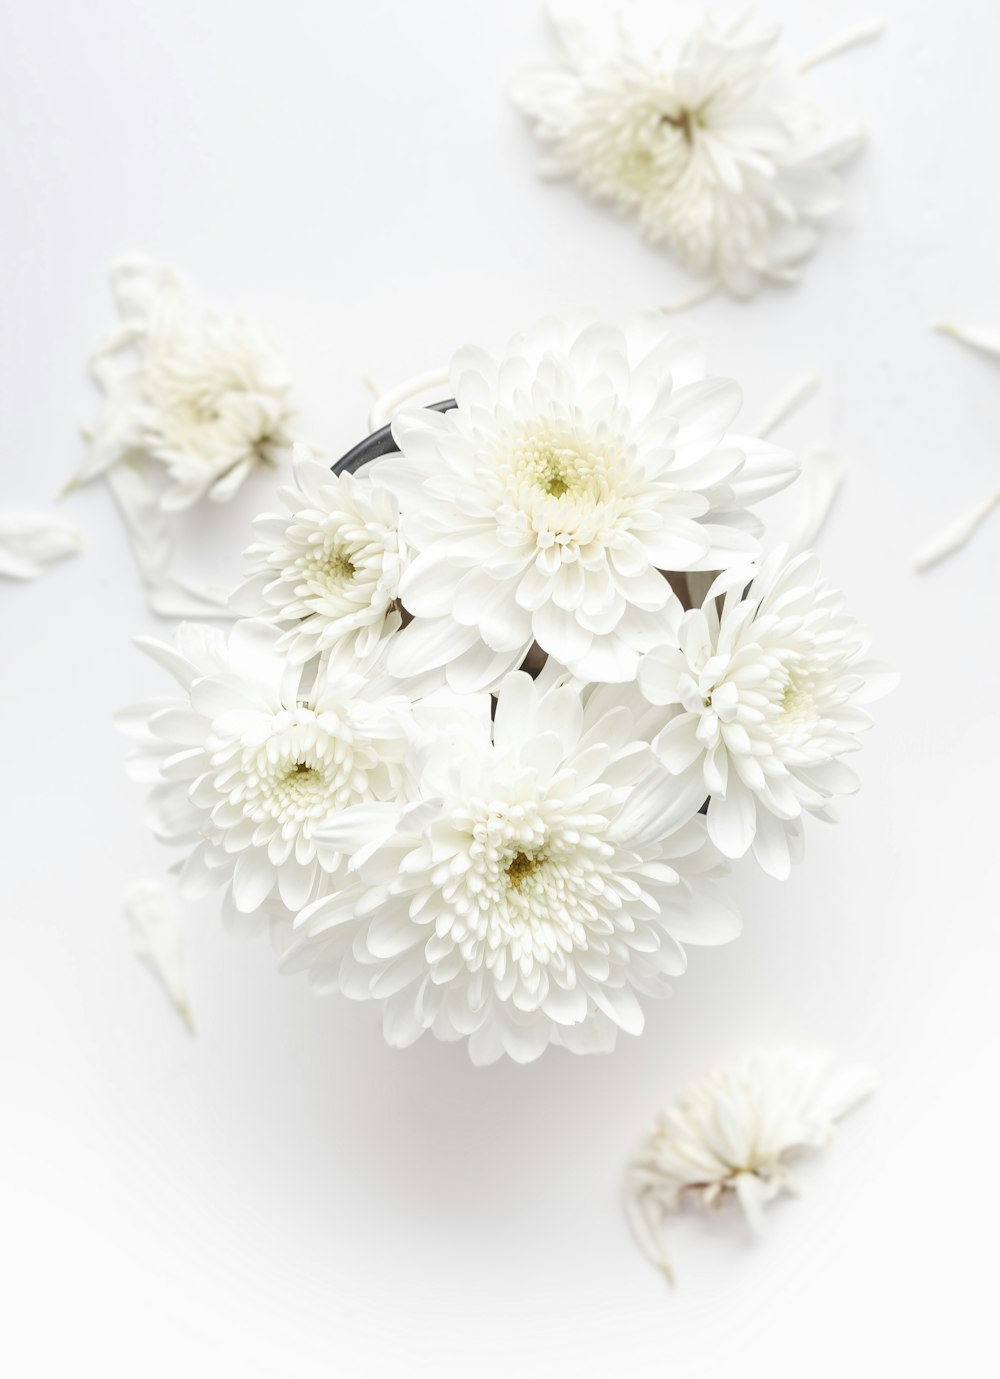 Flower White Pictures | Download Free Images on Unsplash